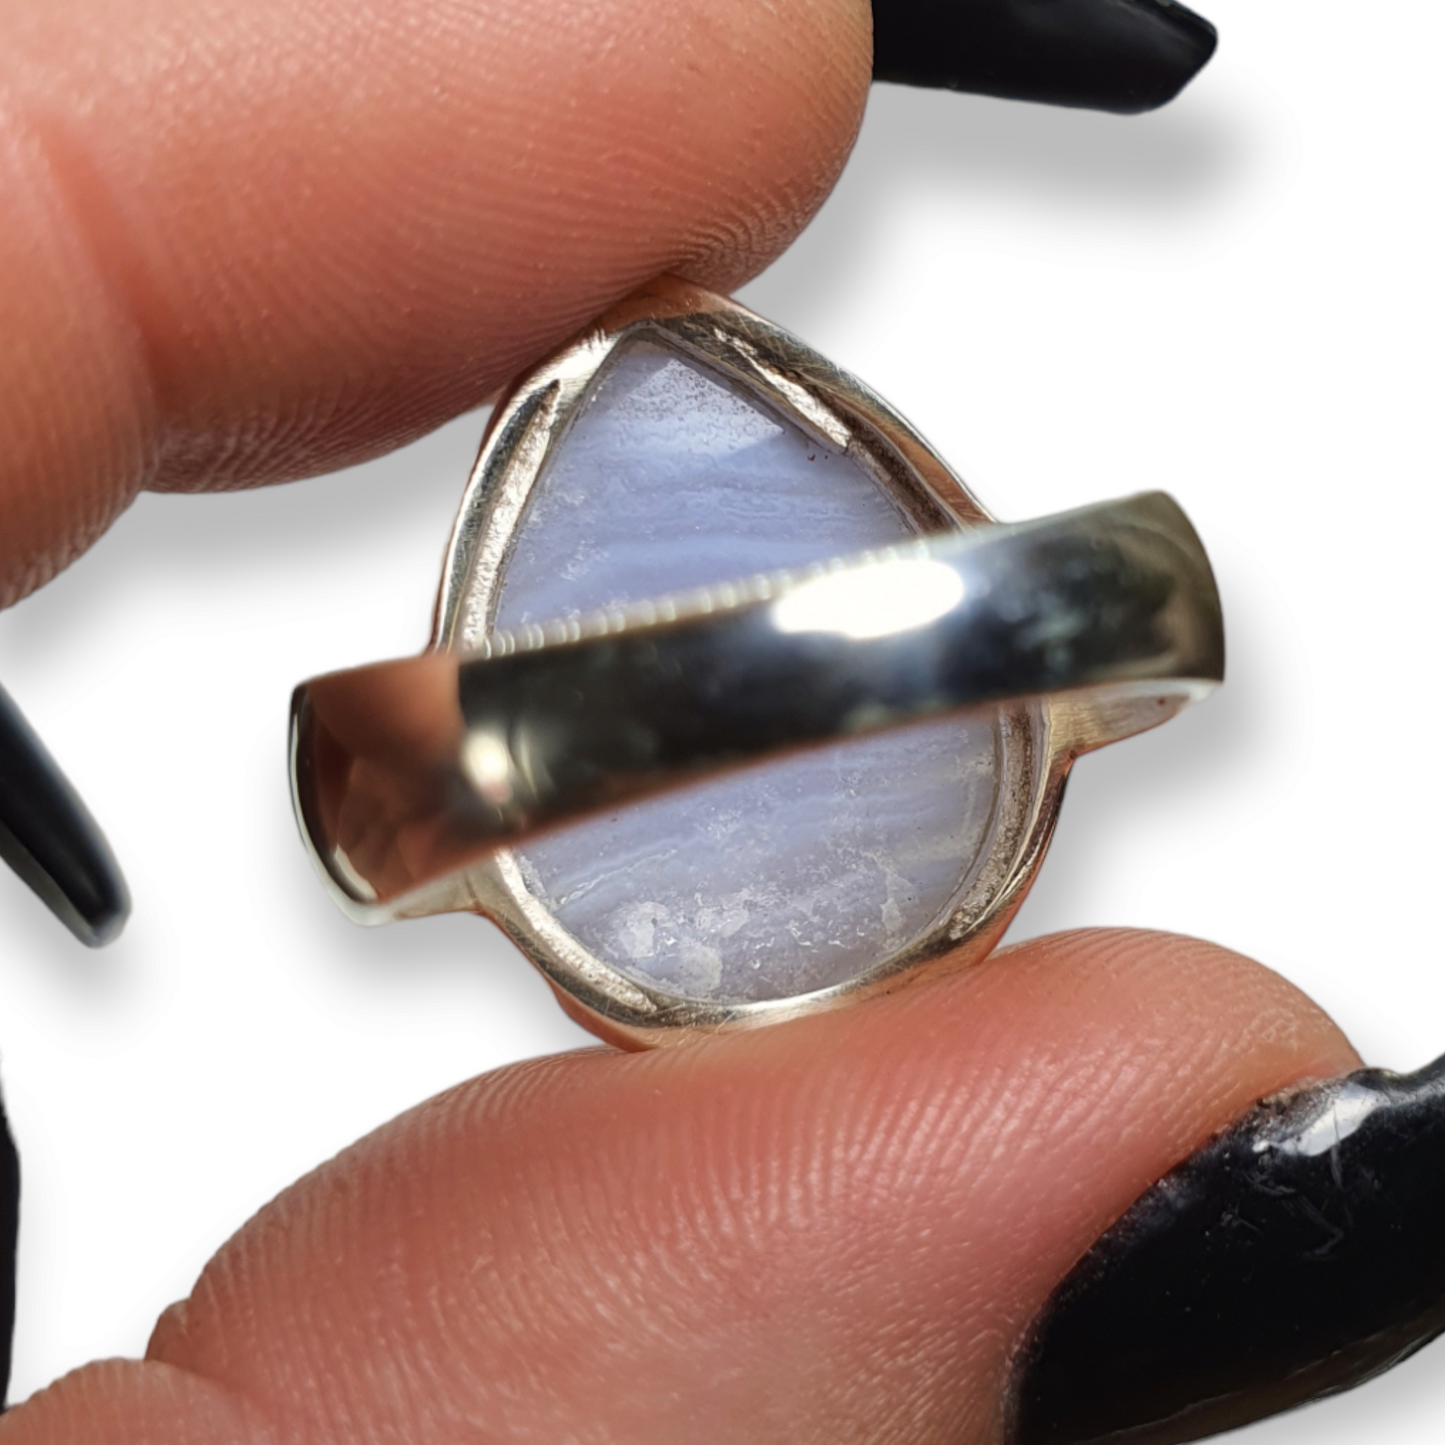 Crystals - Agate (Blue Lace) Teardrop Cabochon Ring - Sterling Silver